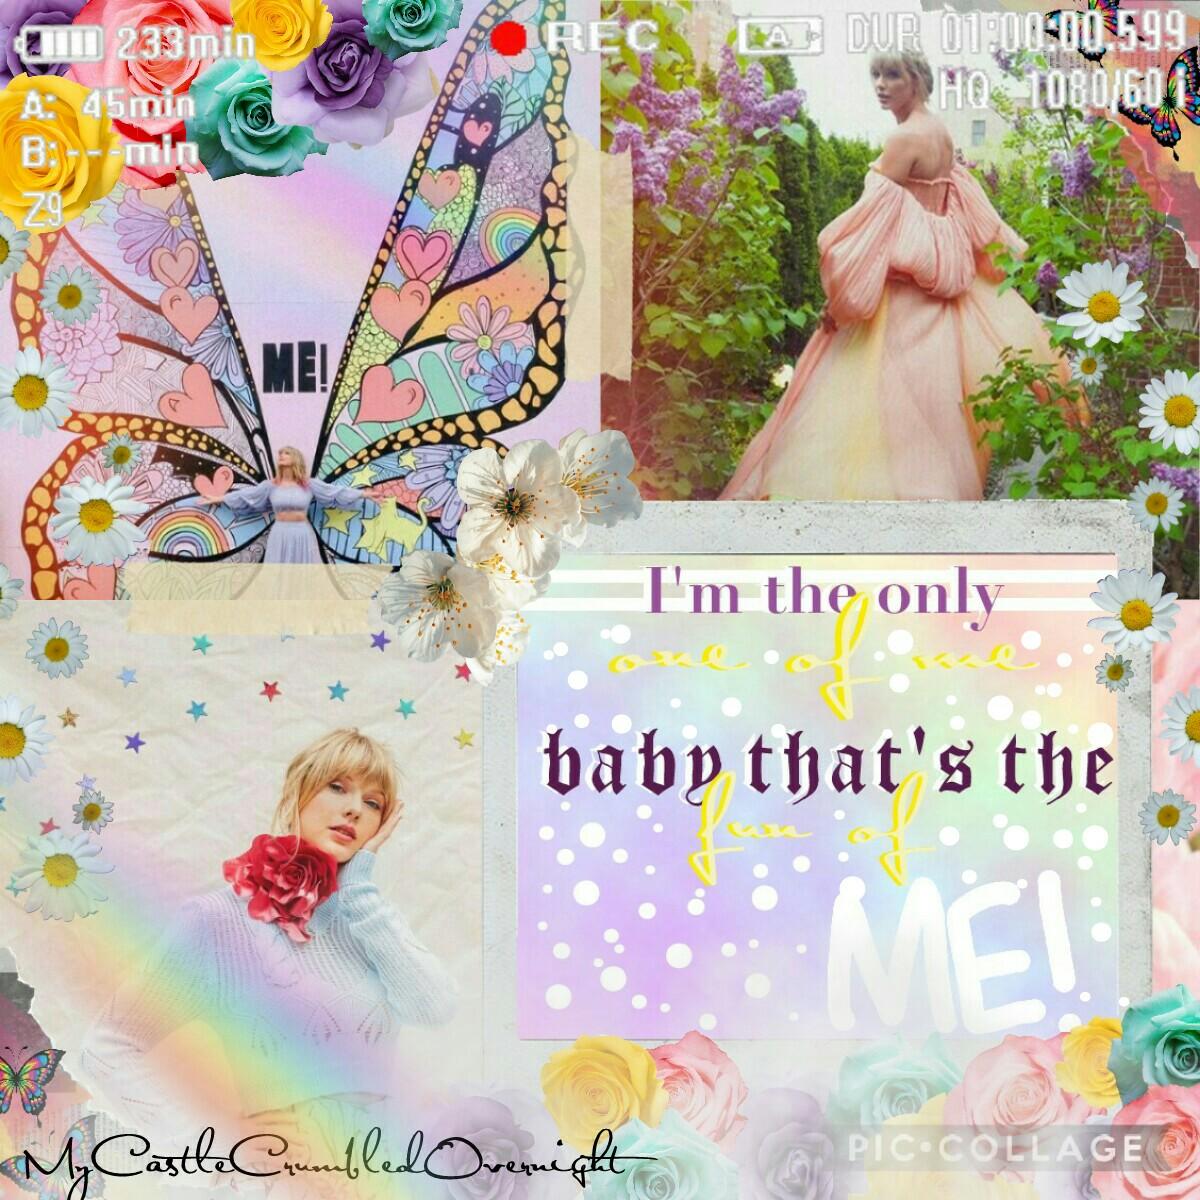 ME! Tap 💕
QOTD: 1-10 How excited are you for TS7?
AOTD: 1,000,000! 😂